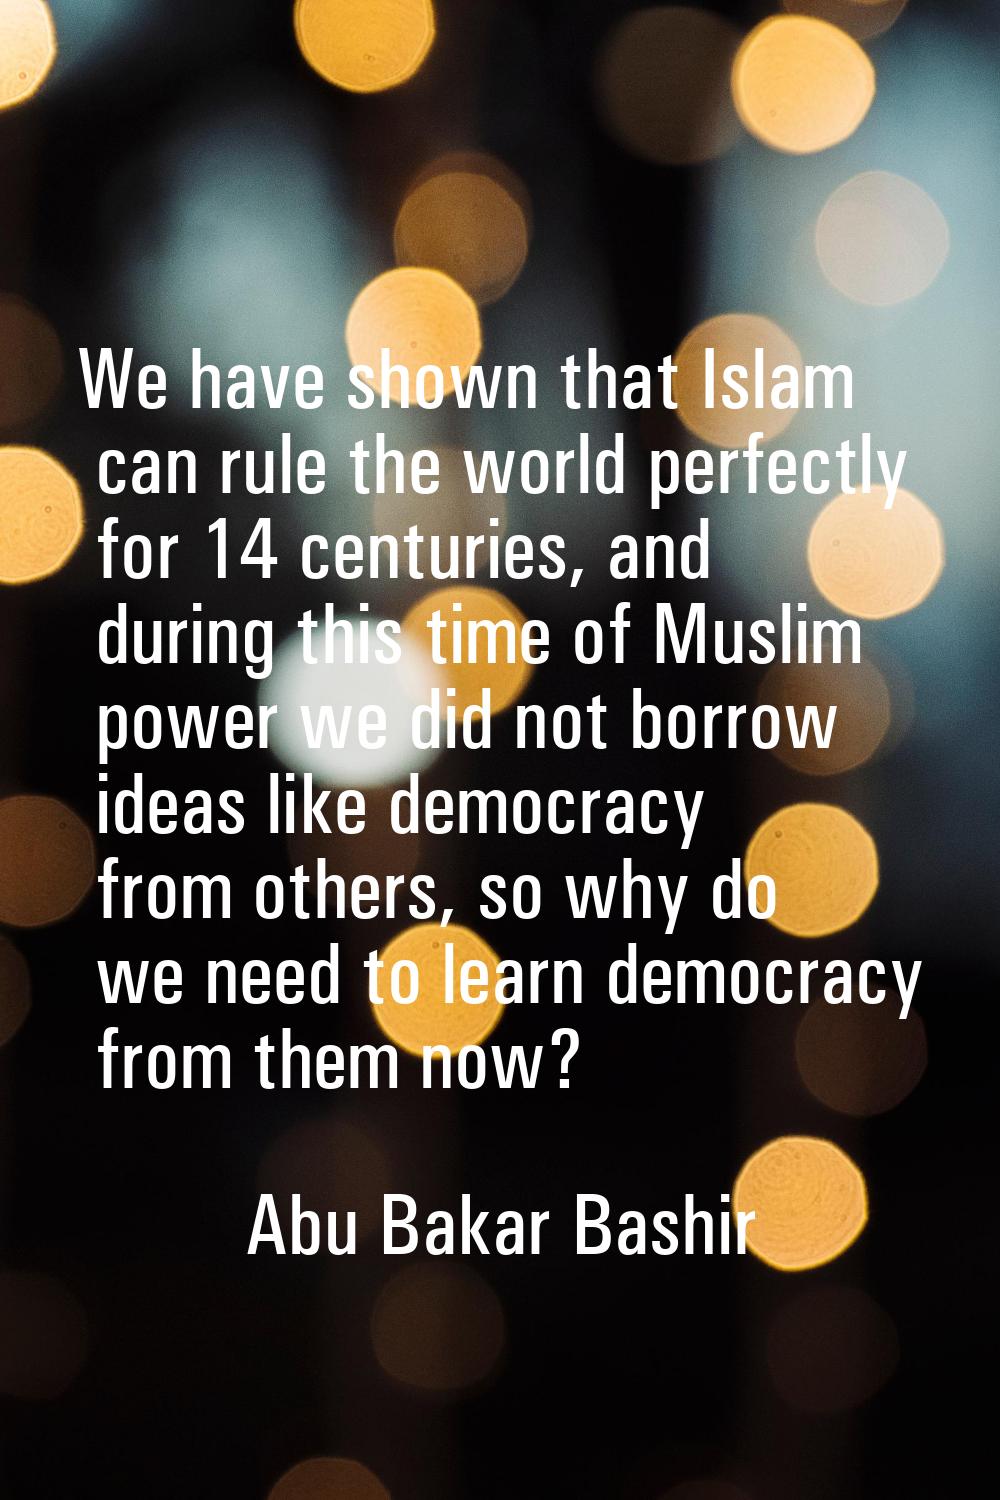 We have shown that Islam can rule the world perfectly for 14 centuries, and during this time of Mus